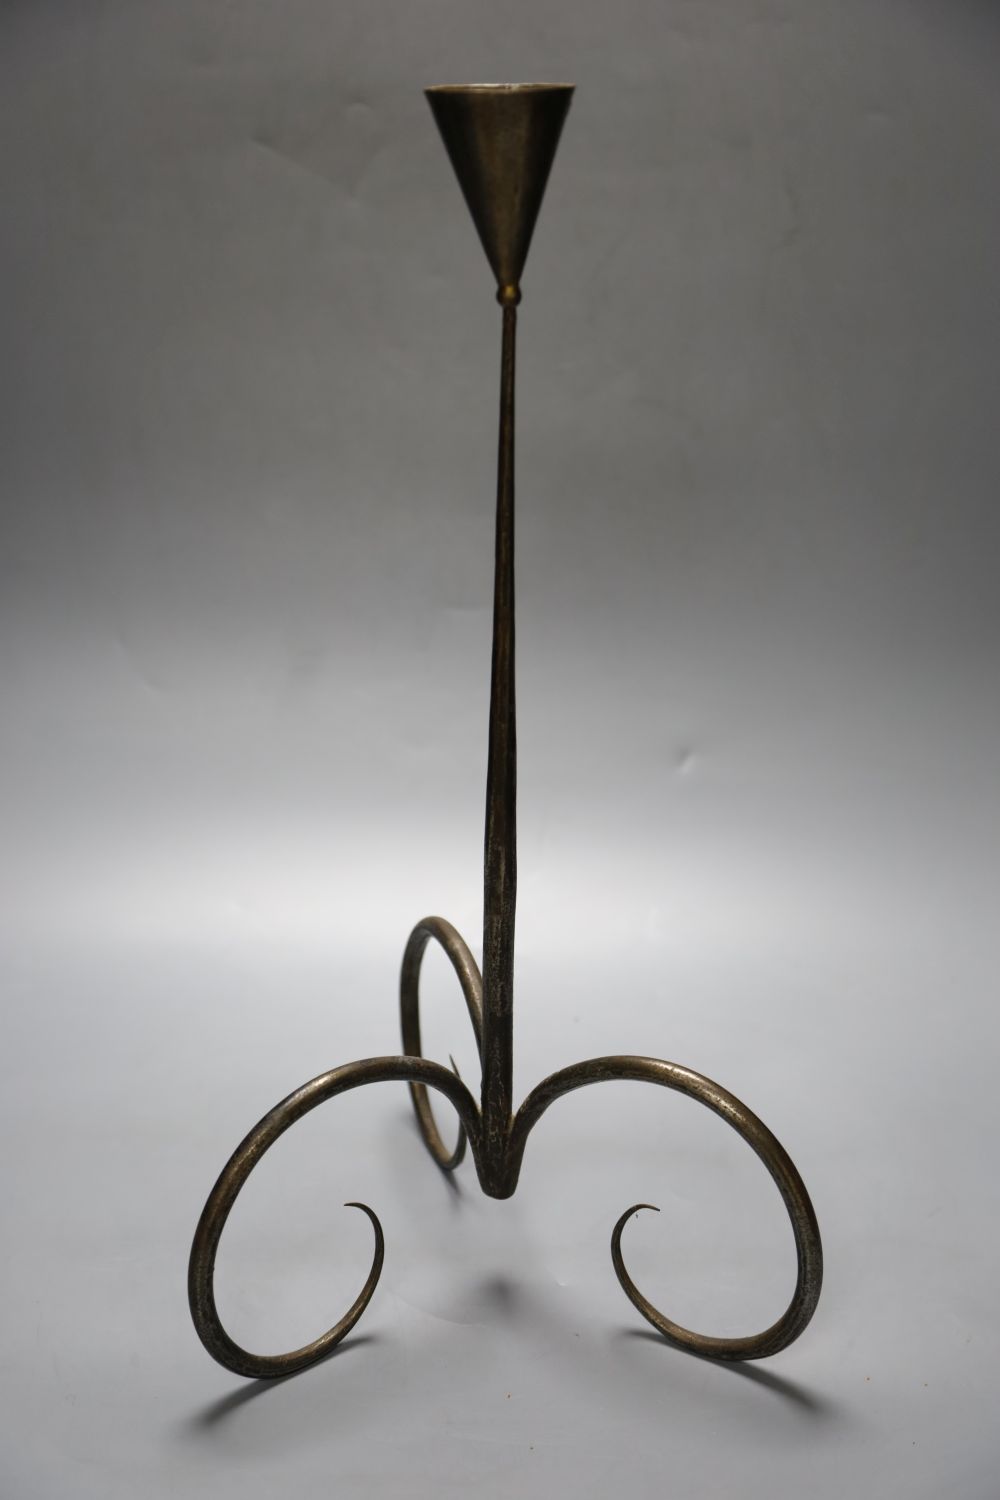 A wrought iron pricket candlestick, by Sean Black, 48cm